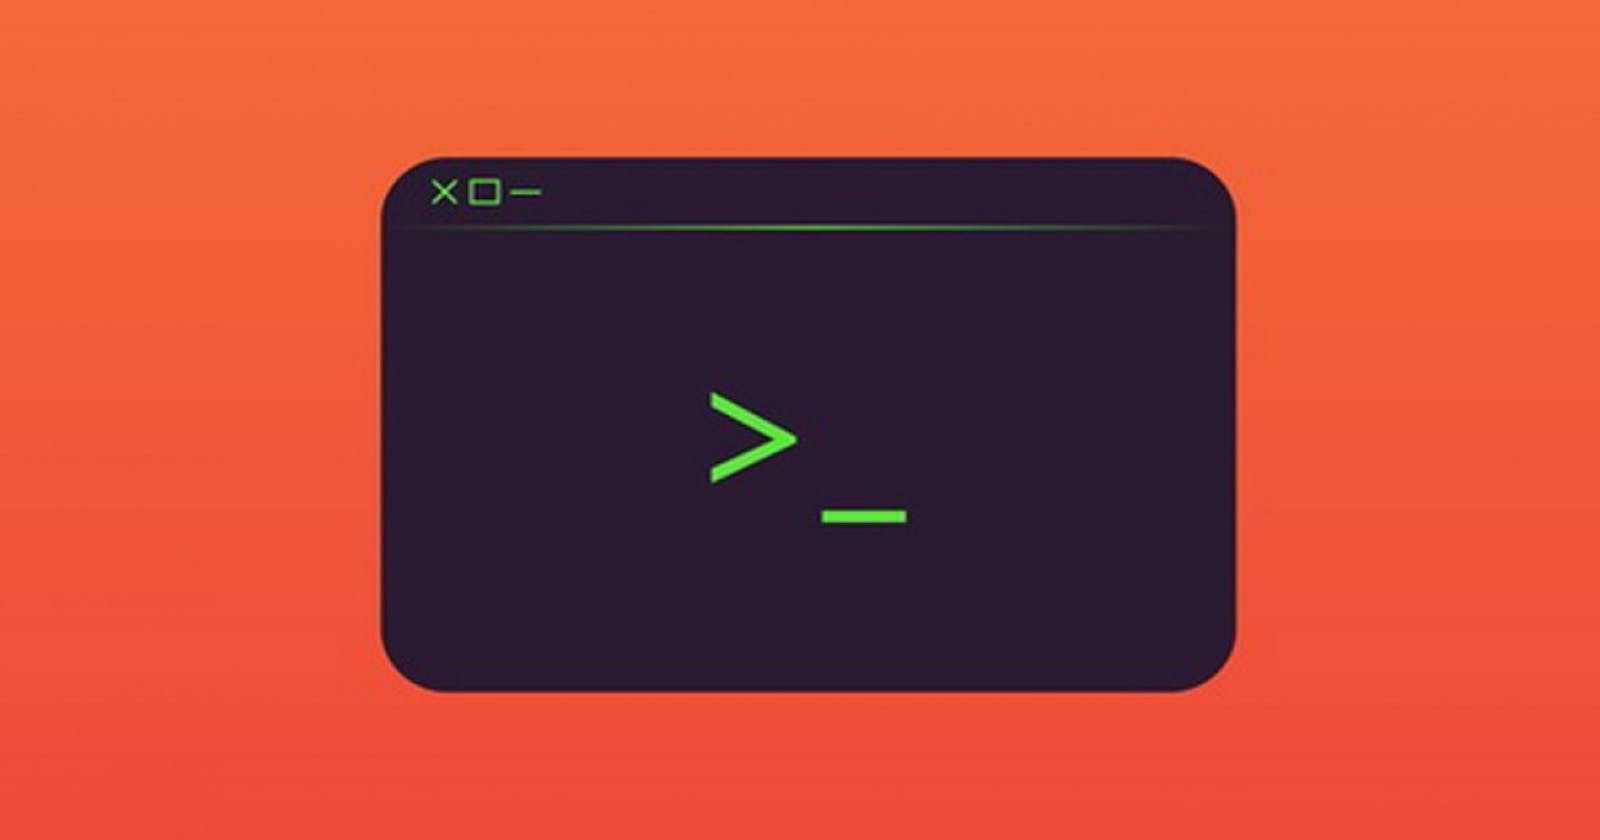 How To Build CLI App In Rust Using Clap - Part 3